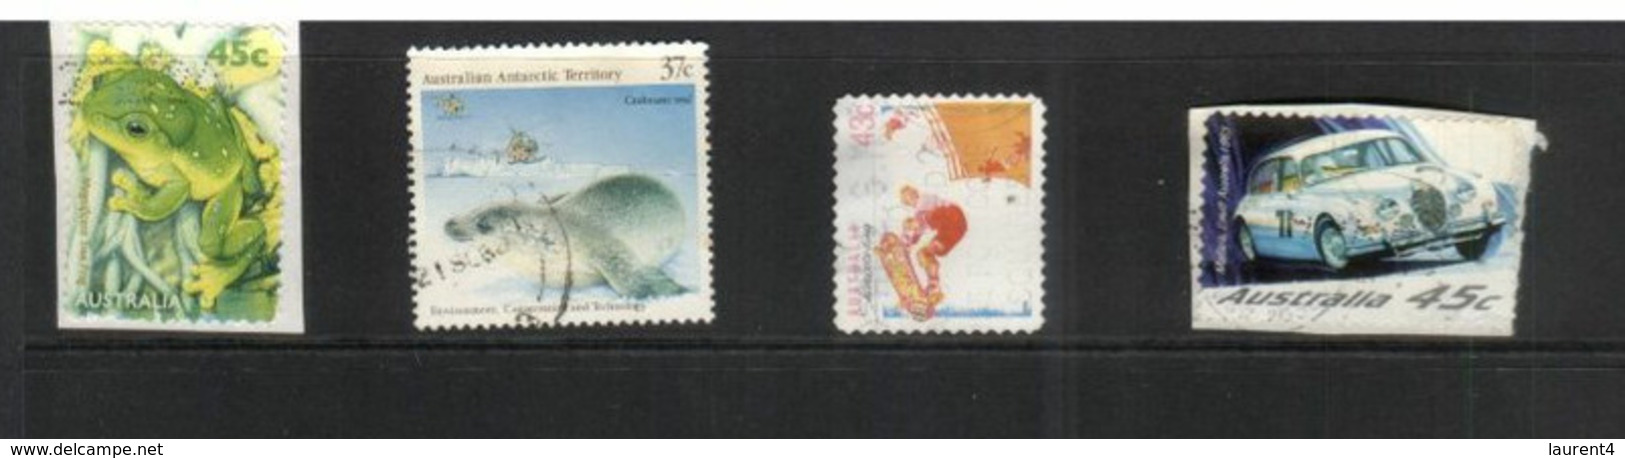 (stamps 3/9/2020) Australia UNUSUAL Color(s) 4 Stamps (2 On Paper / 2 Off Paper) - Errors, Freaks & Oddities (EFO)